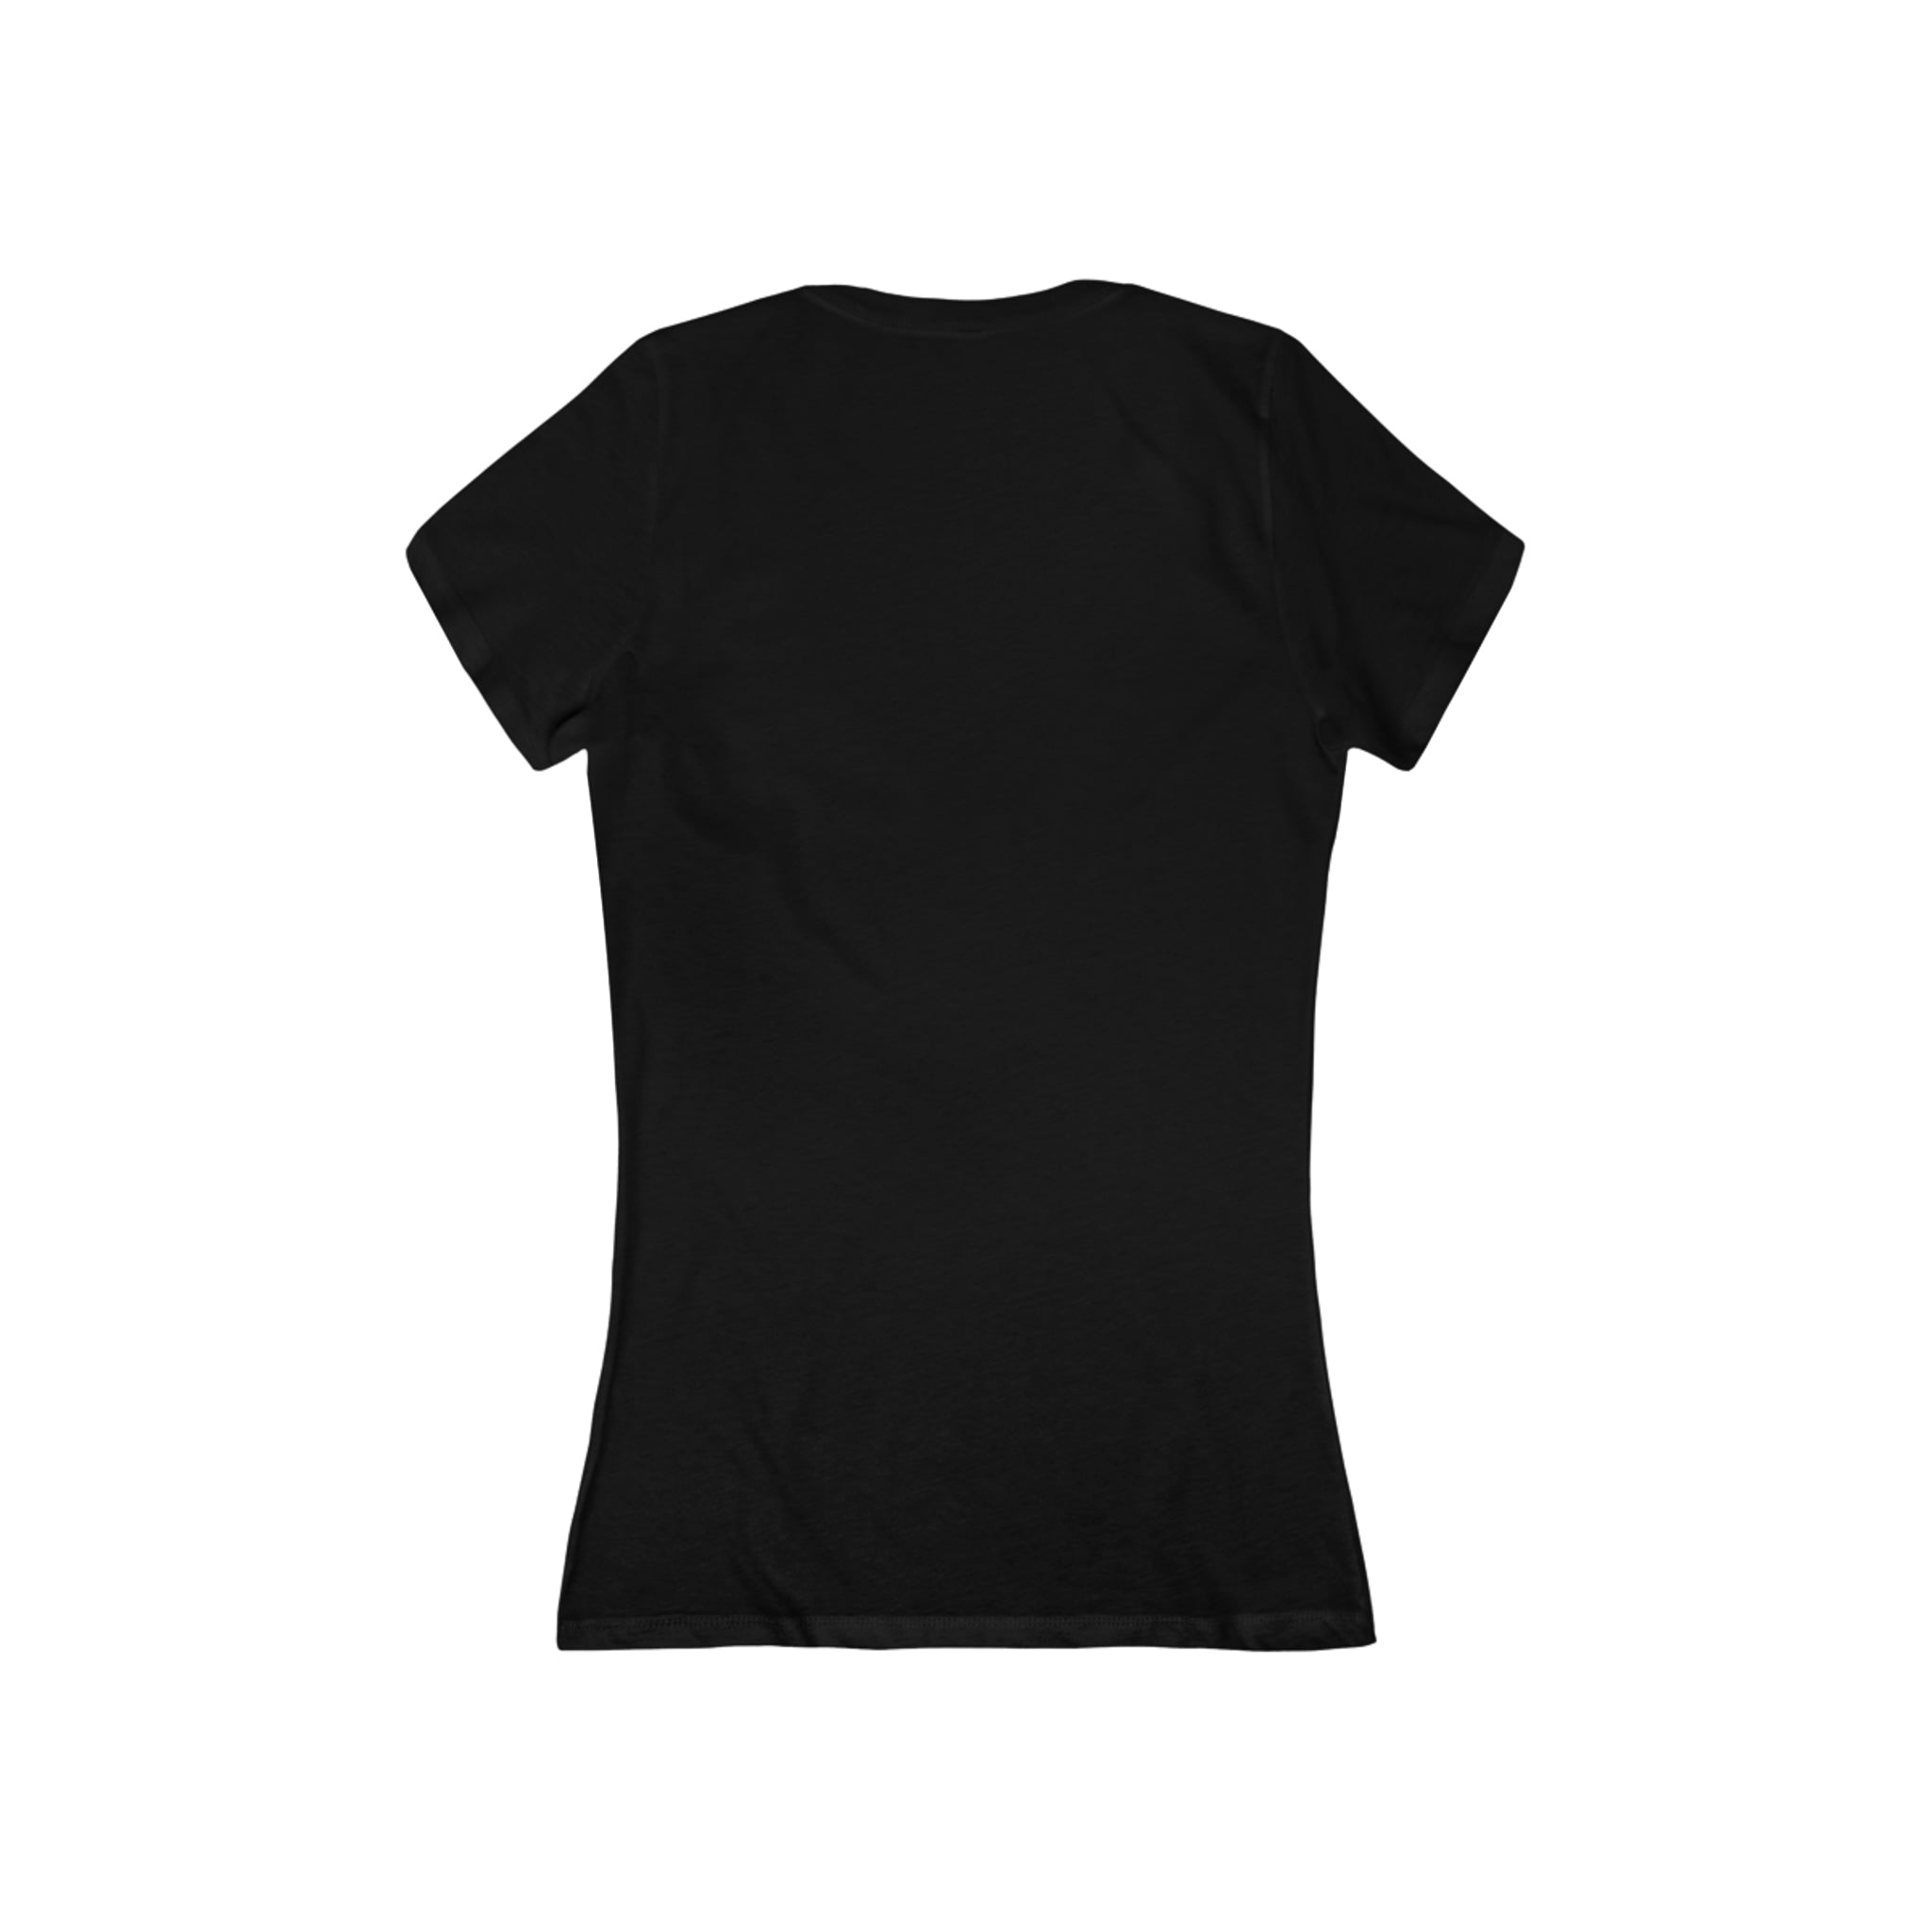 Collect Shoes & Socks Women's Deep V-Neck Tee